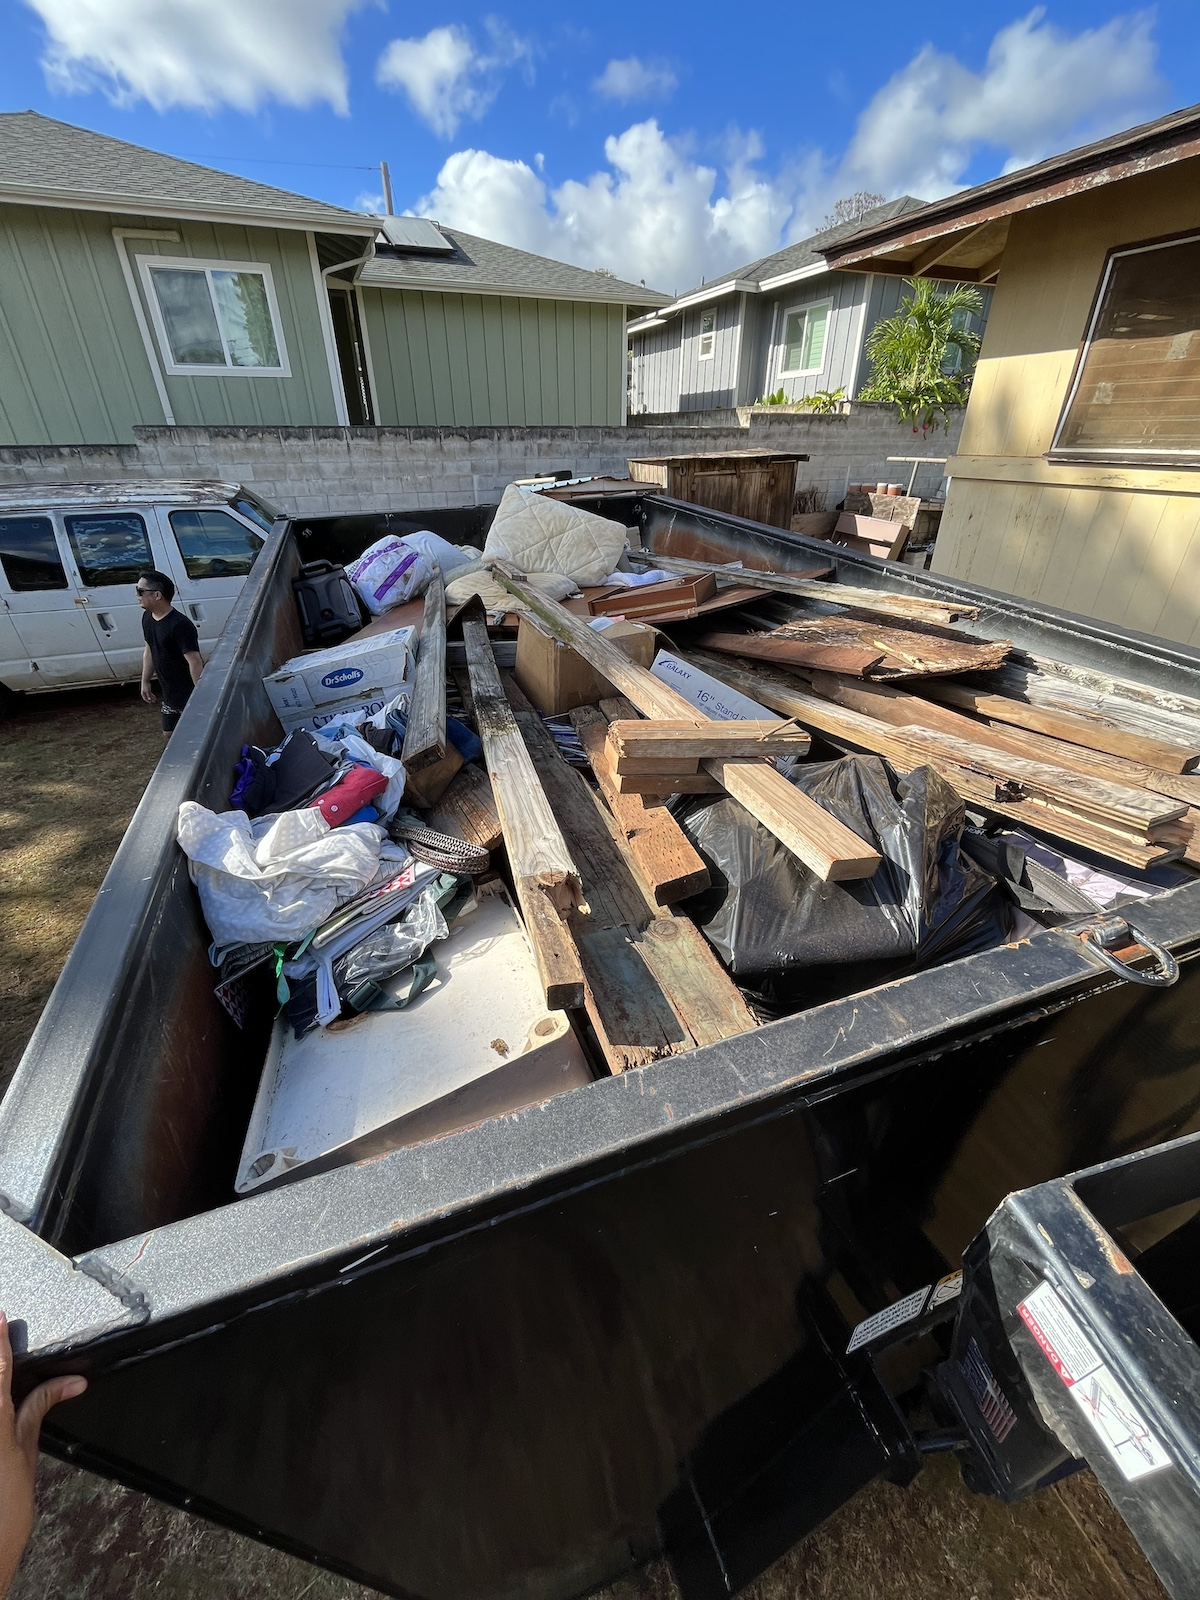 A Kana'i's Junk Removal dumpster being rented out in Oahu.